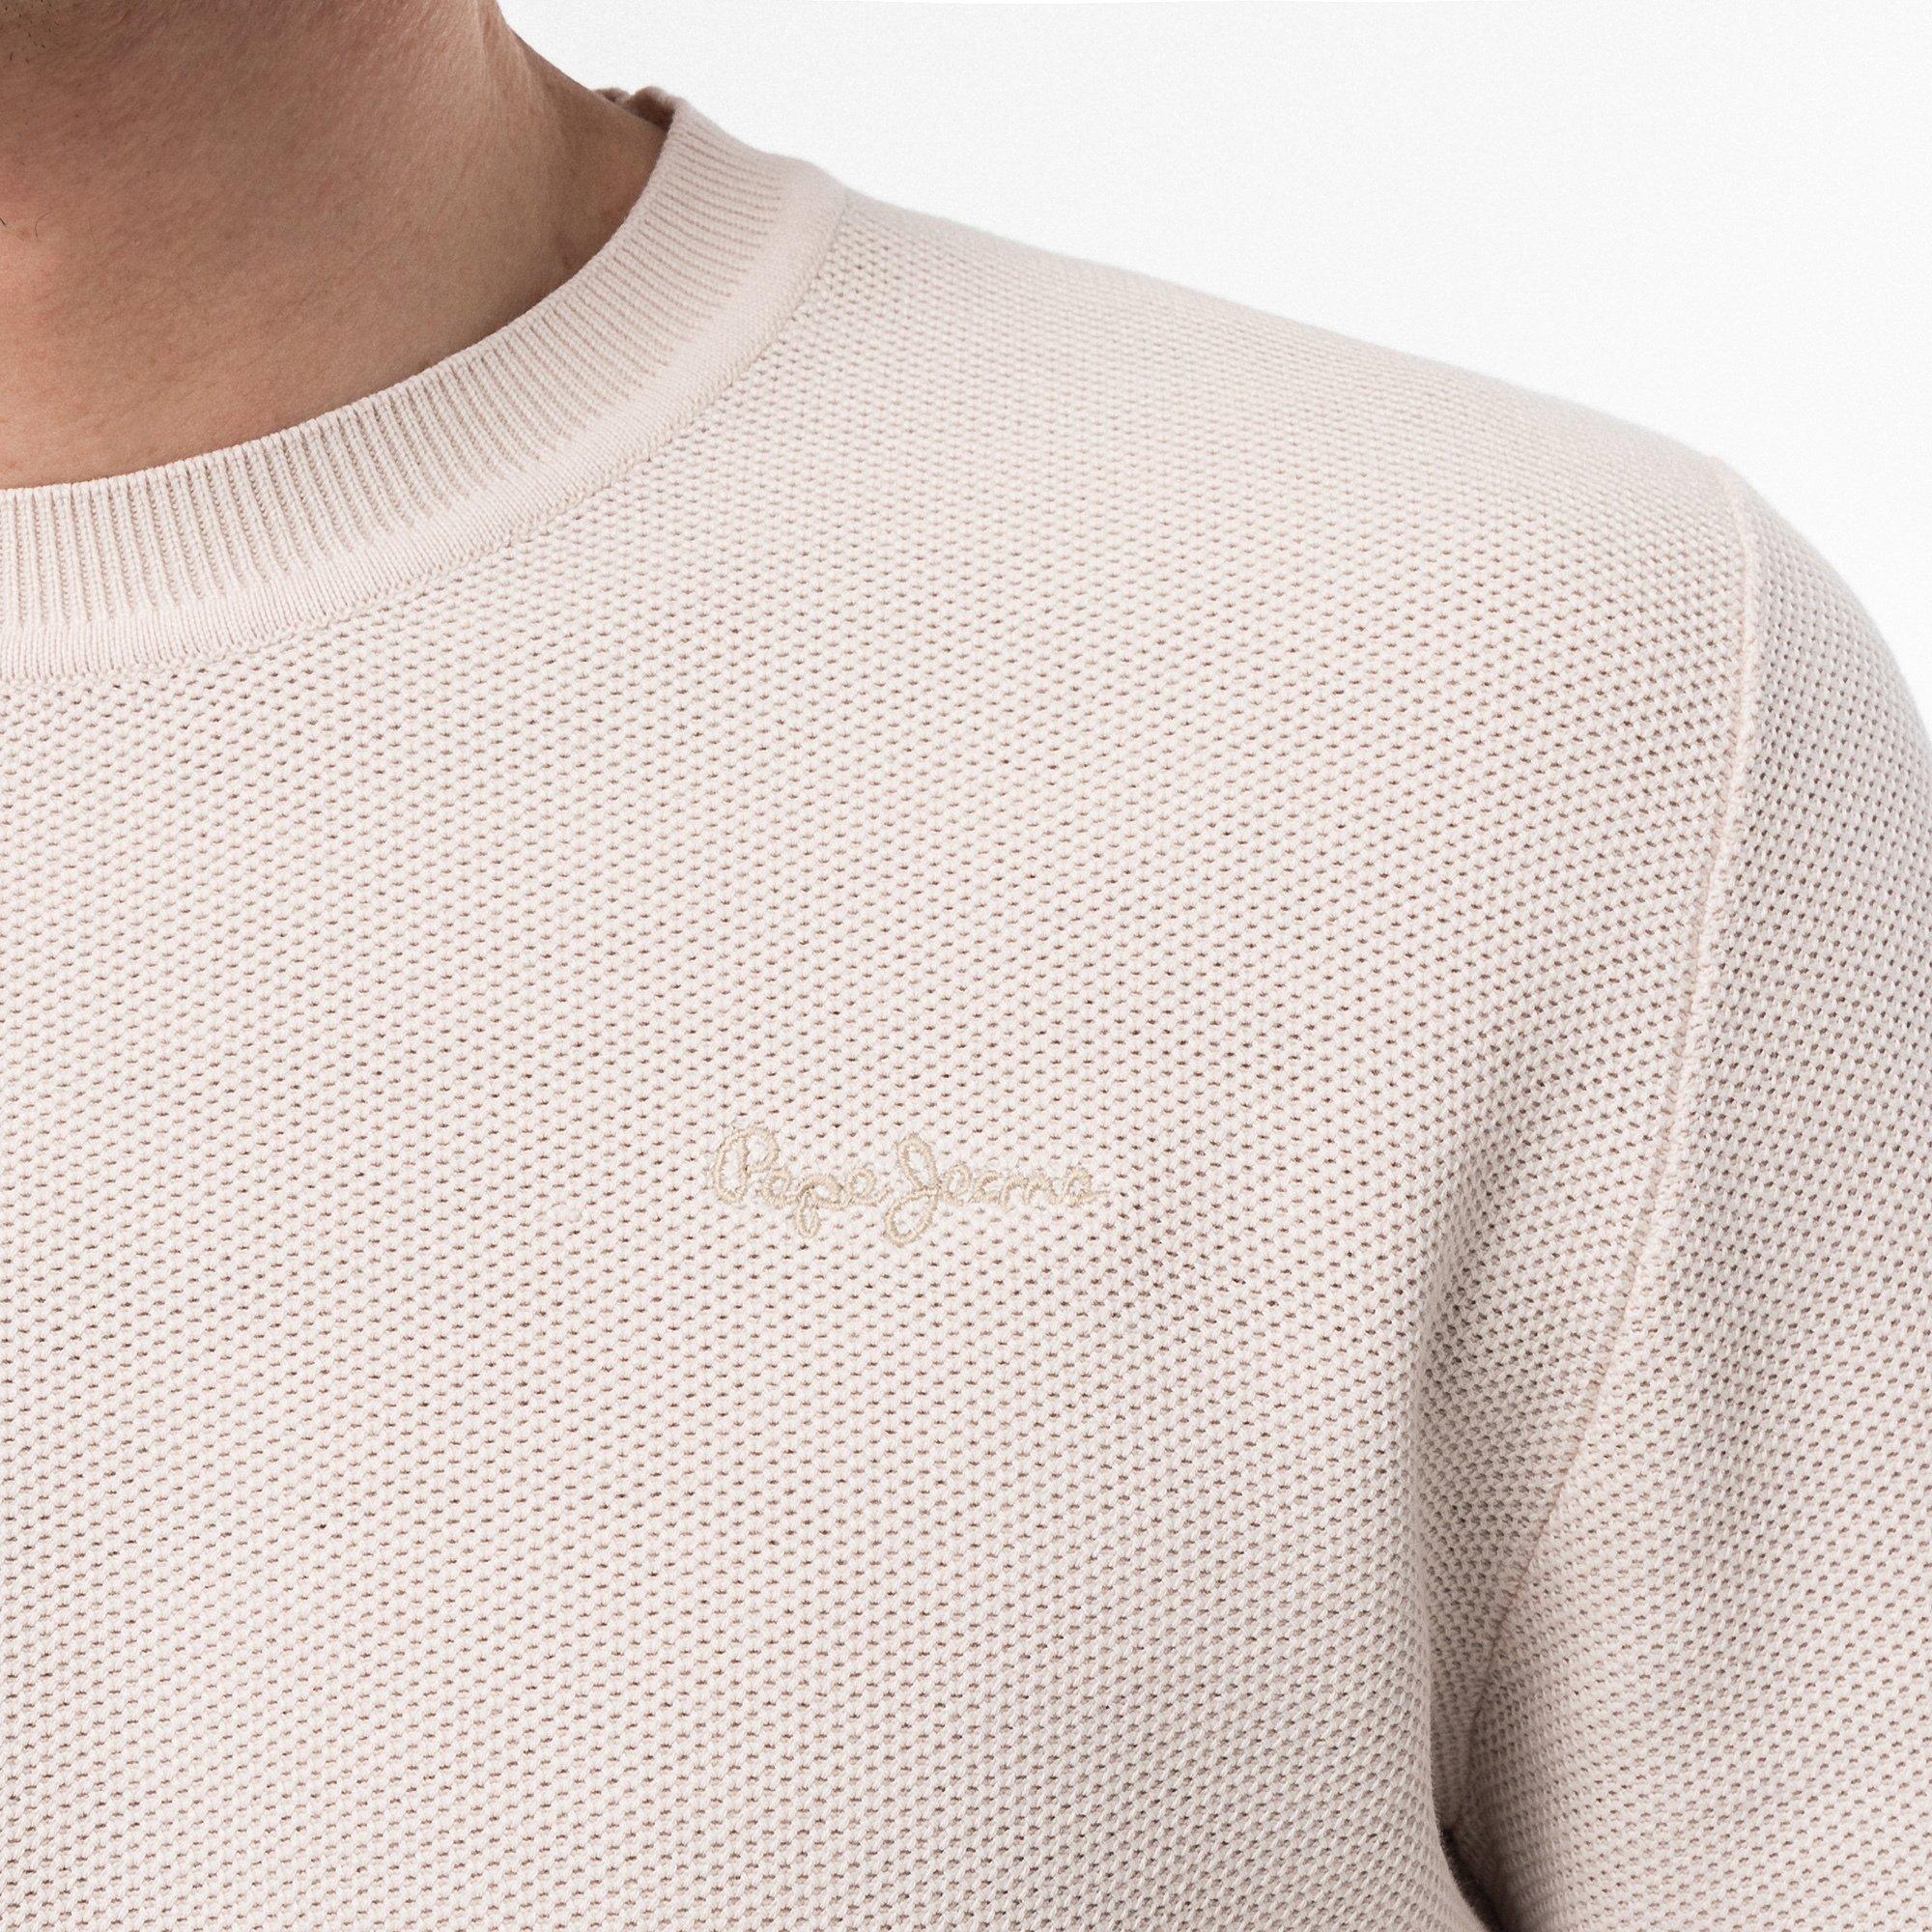 Pepe Jeans SILVERTOWN Pullover 